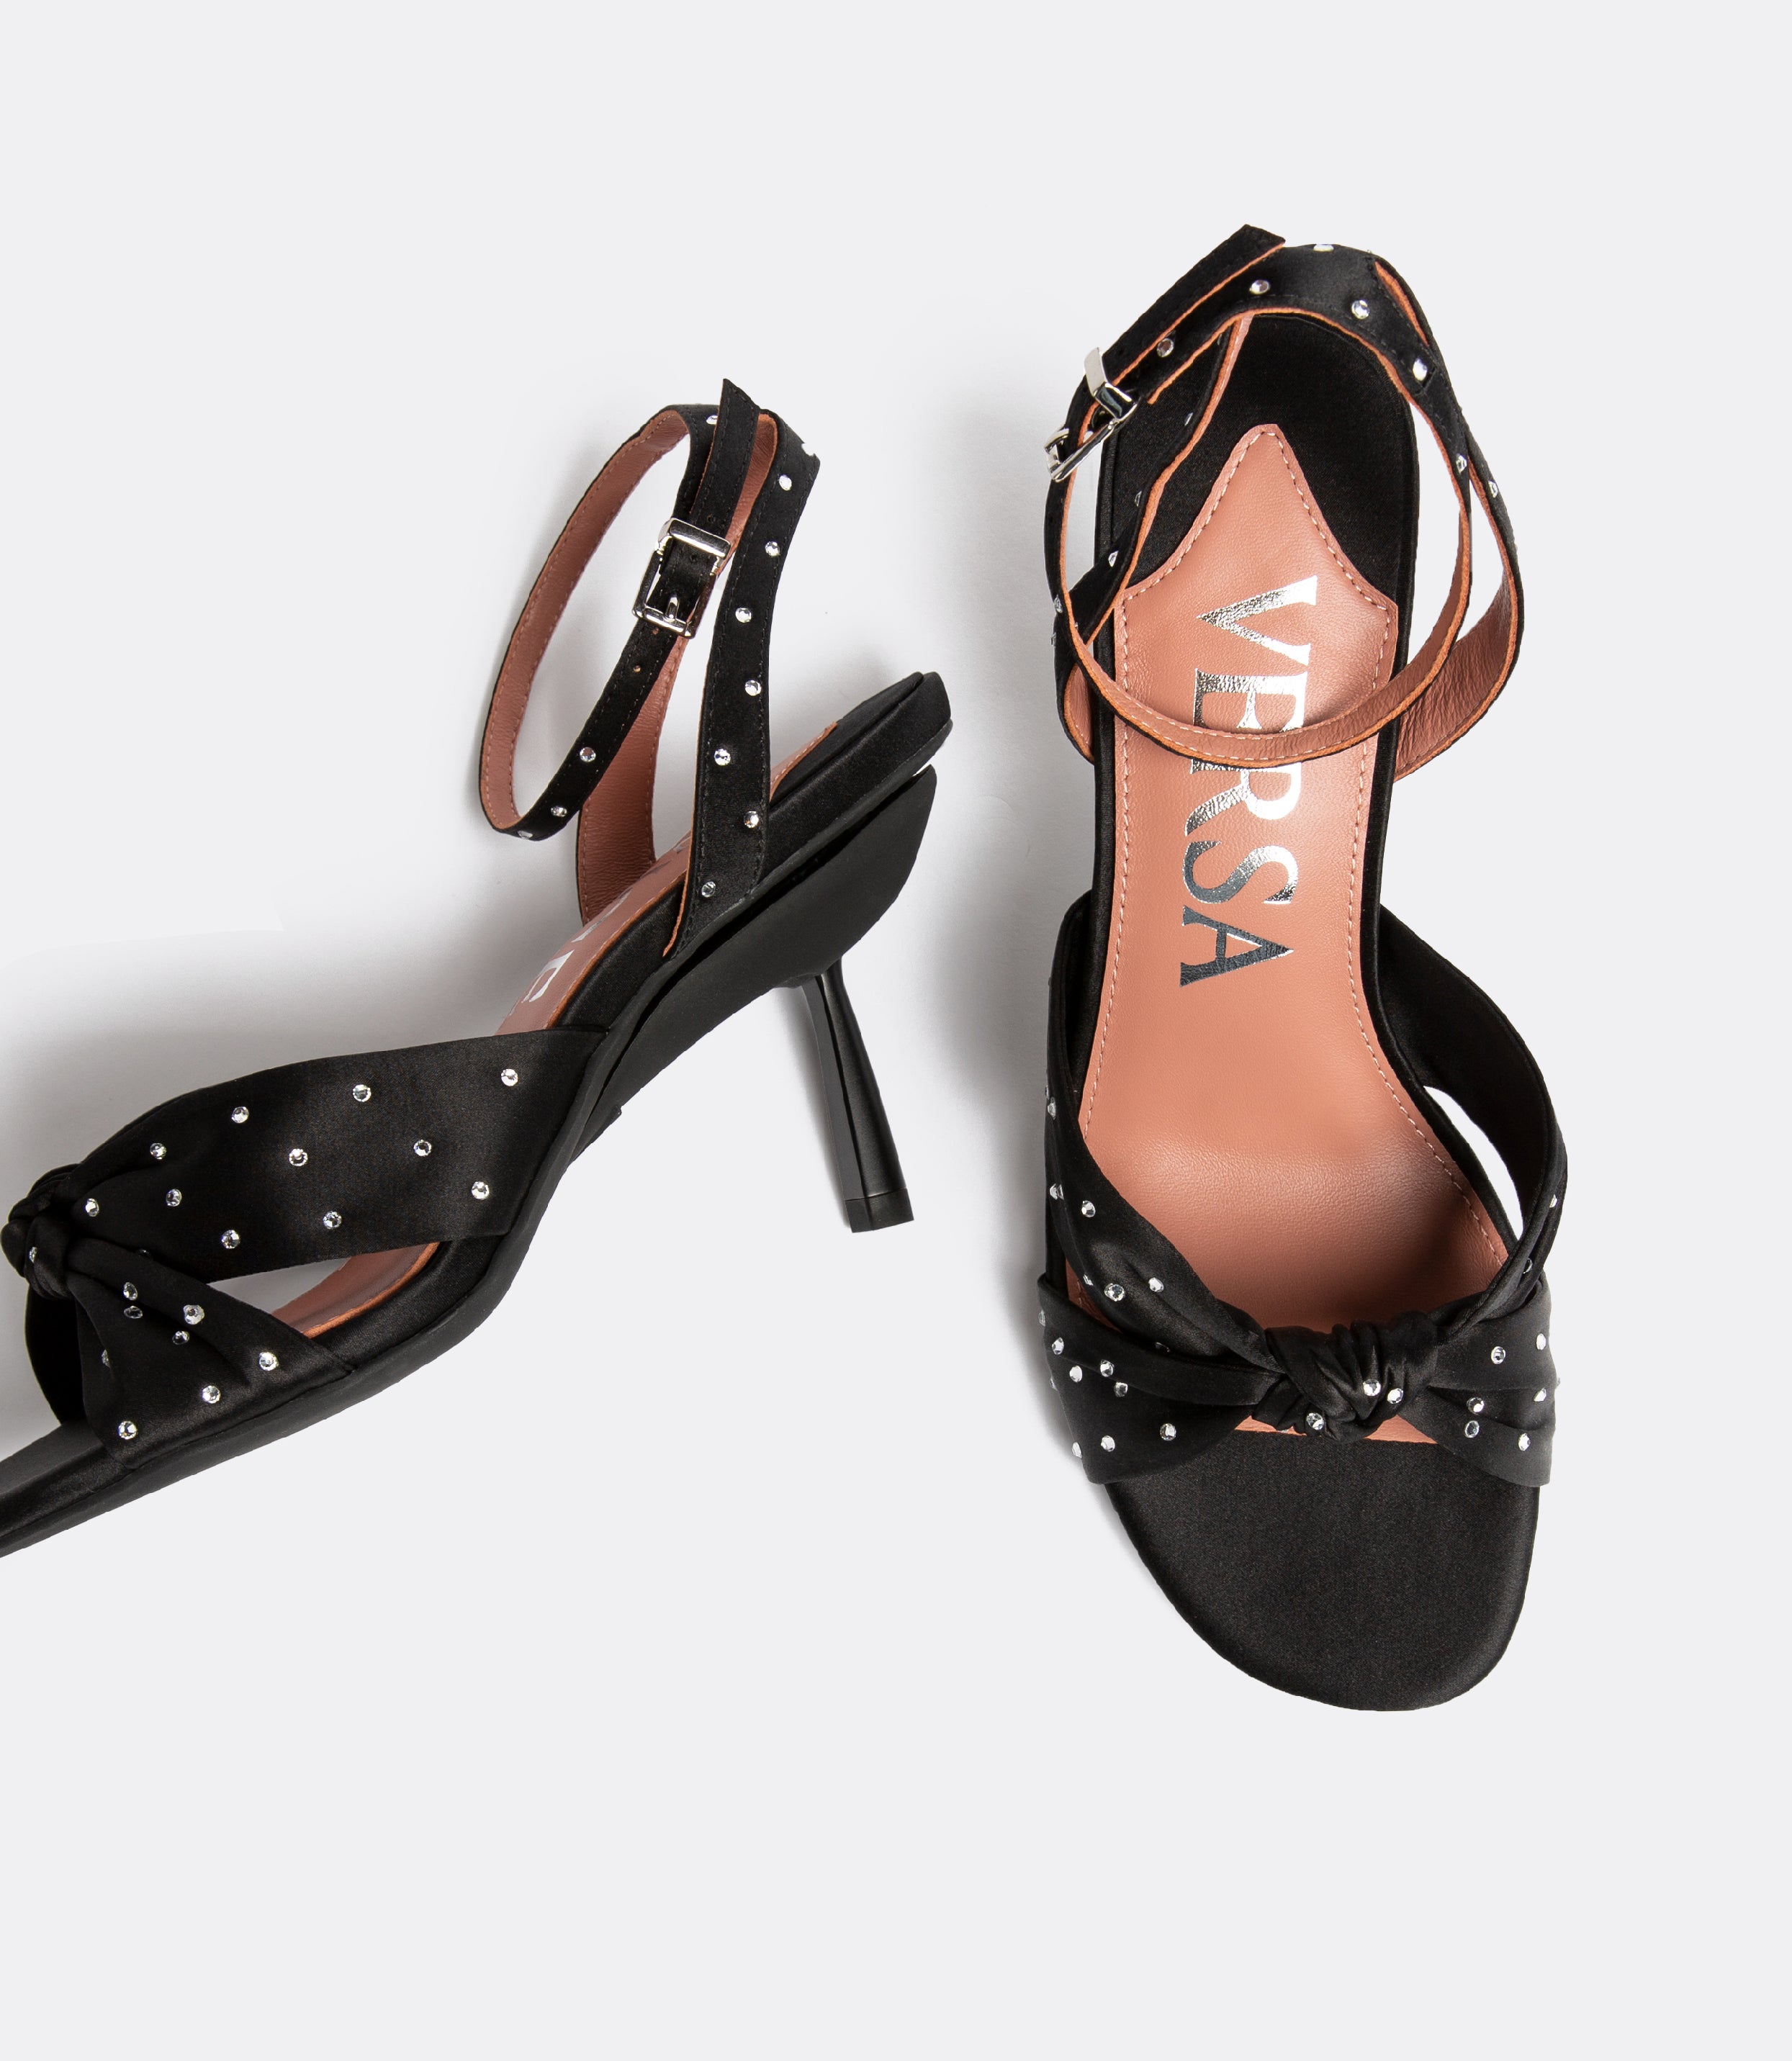 Top view of the black silk crystal sandal.